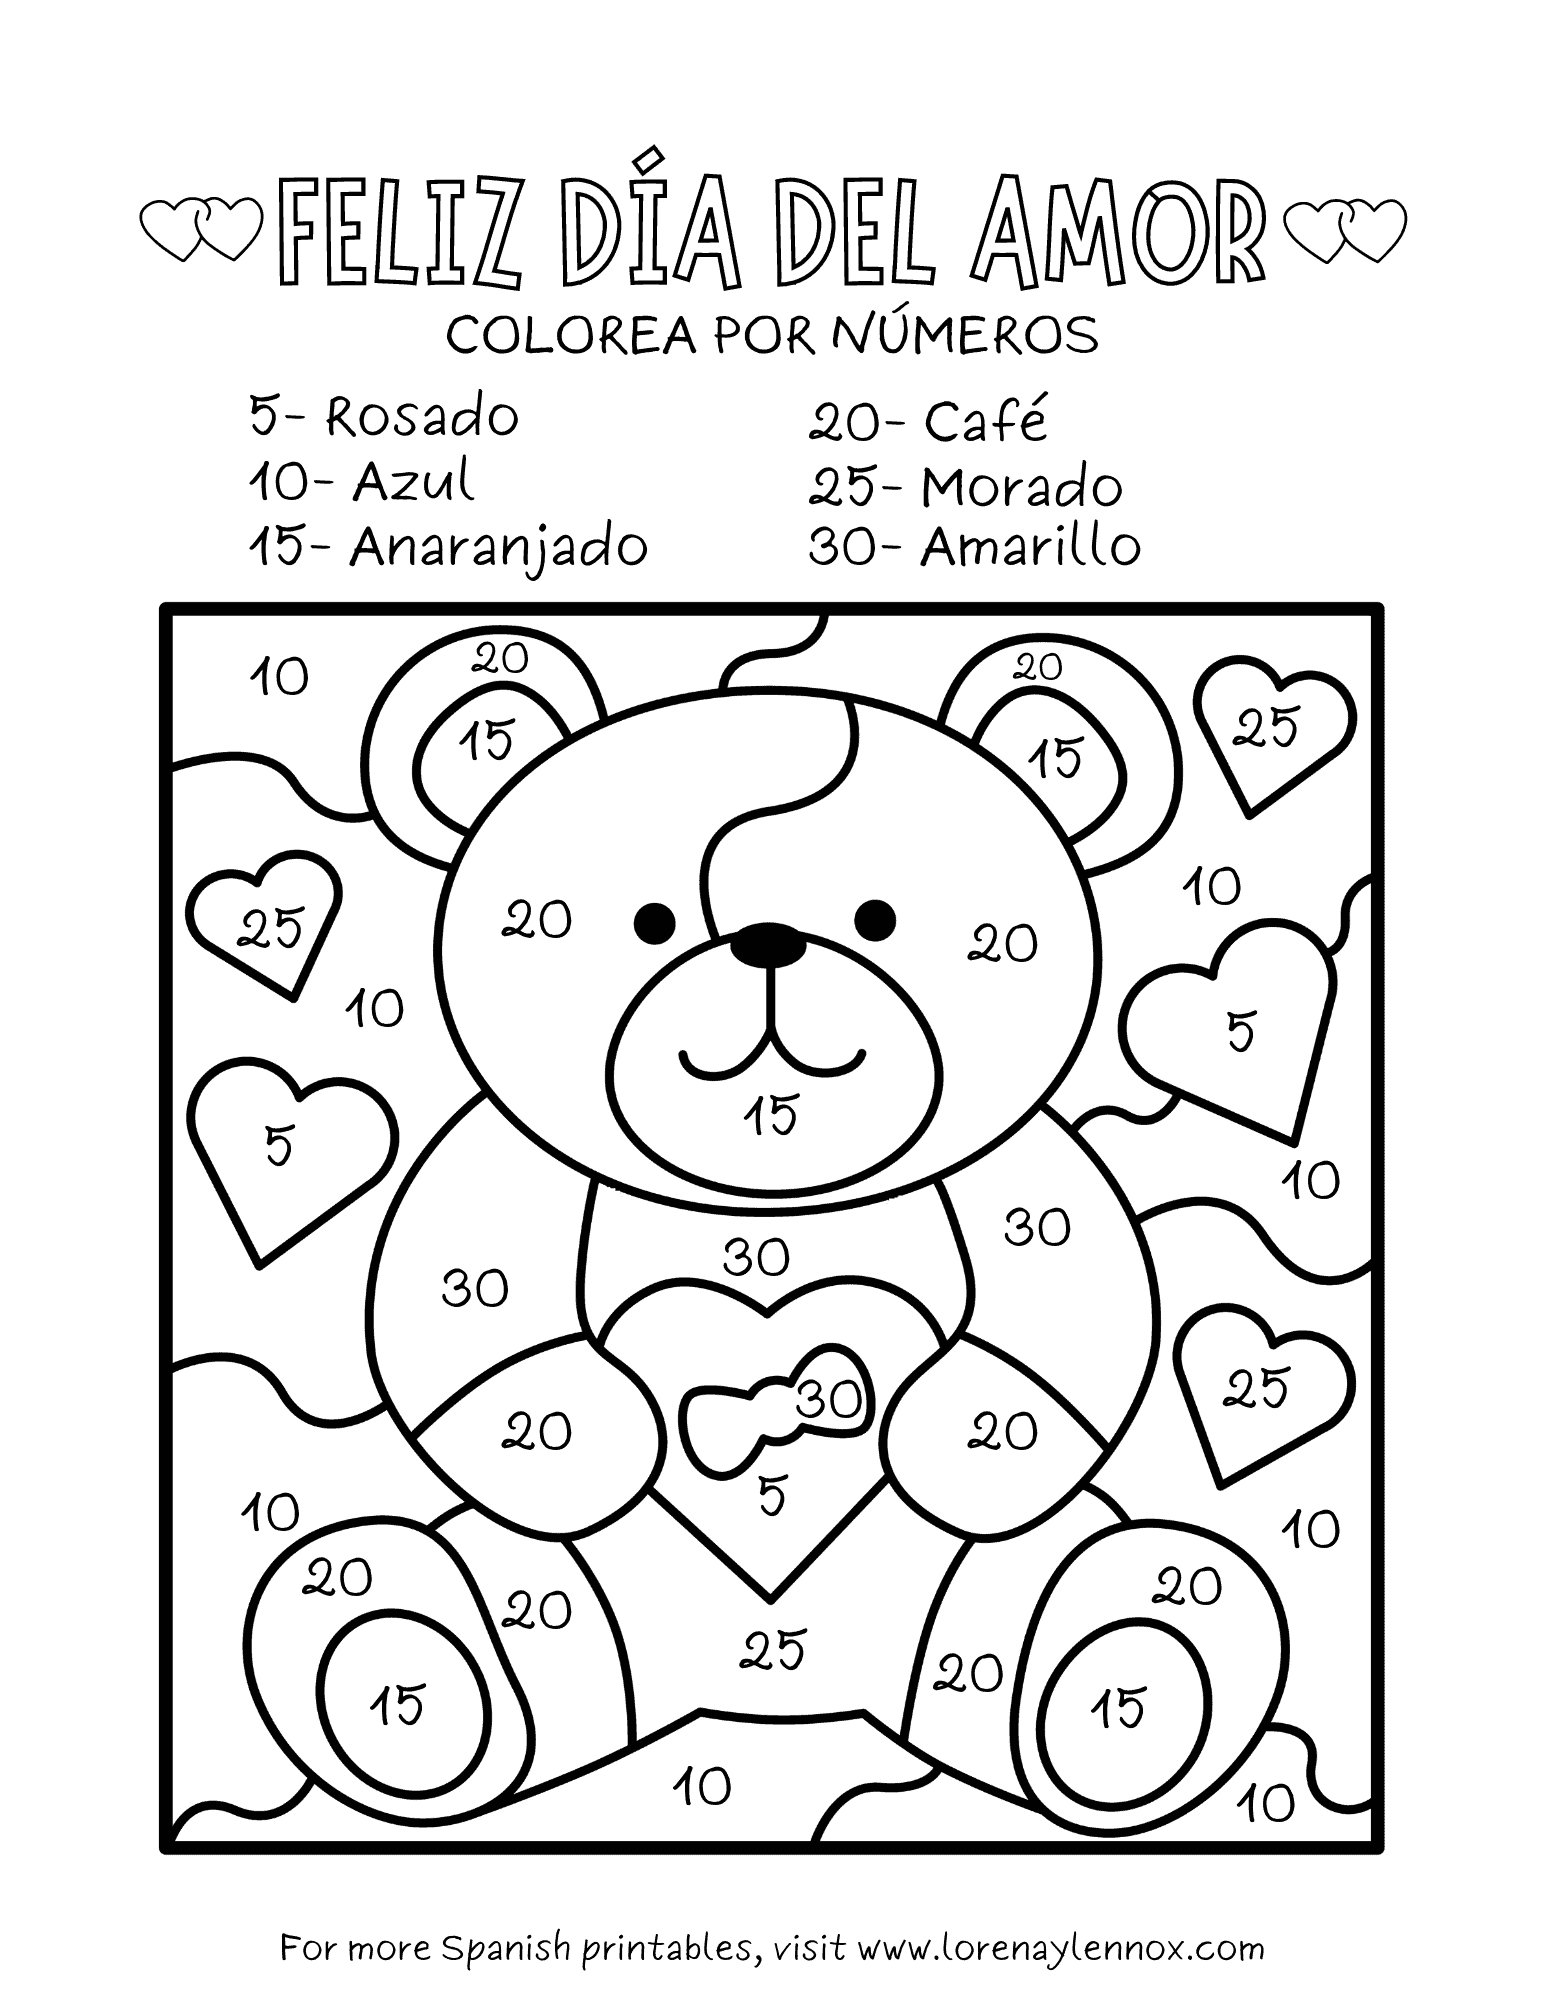 Valentine’s Day Color by Number Worksheets in Spanish